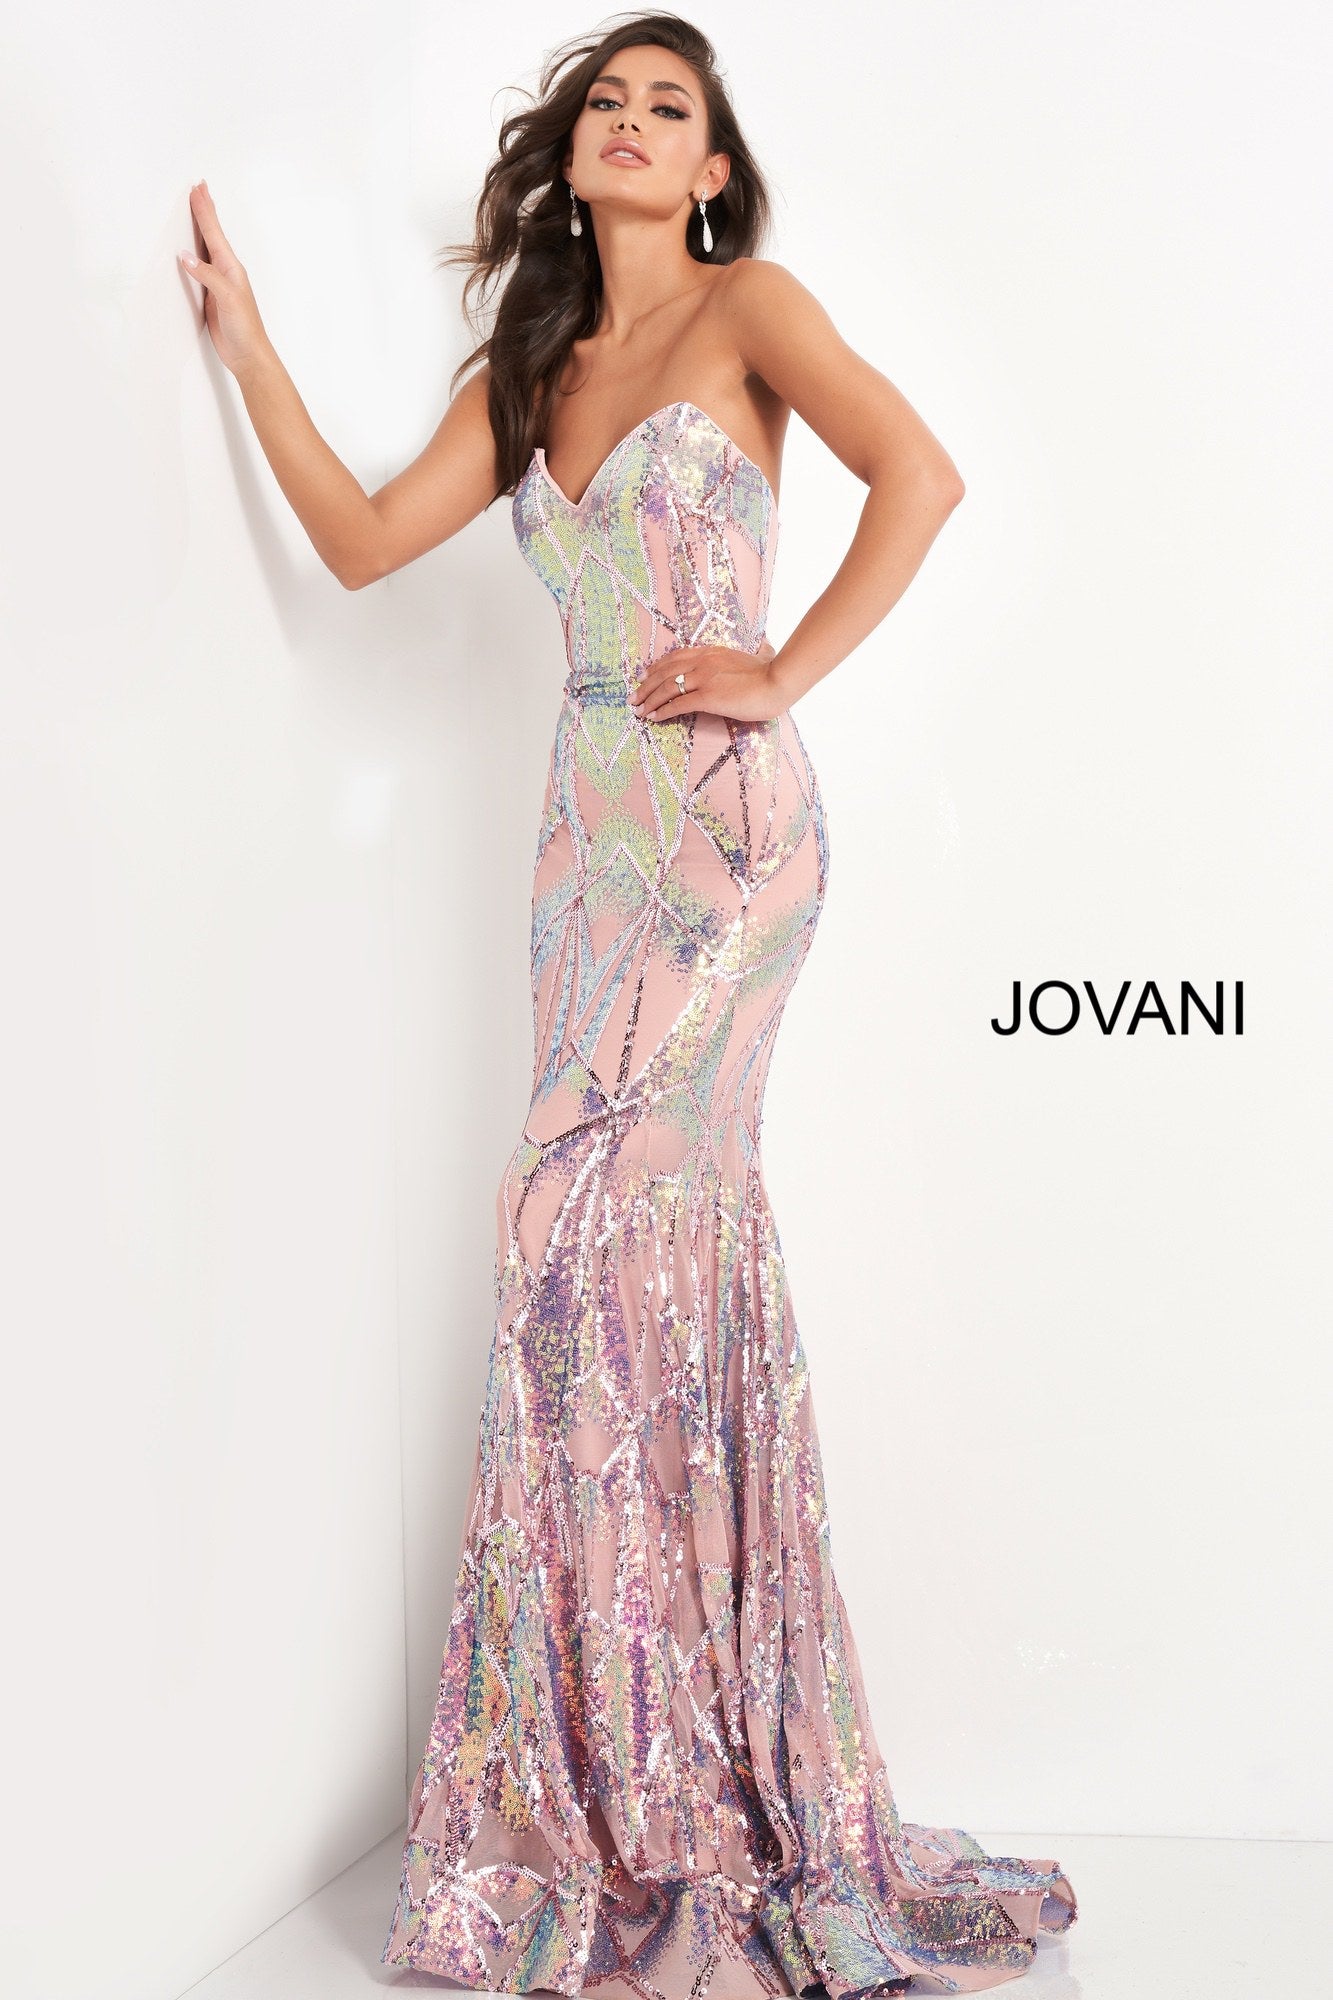 Jovani 05100 is a long Fitted formal evening gown. Featuring a strapless peak - deep sweetheart neckline. This stunning Pageant & Prom Gown is Fully Embellished with Glitter & Sequins to Create A Glamorous Geometric dimensional design. Mermaid silhouette with a lush trumpet skirt & sweeping train.  Available Sizes: 00,0,2,4,6,8,10,12,14,16,18,20,22,24  Available Colors: black/multi, light-blue, navy, pink